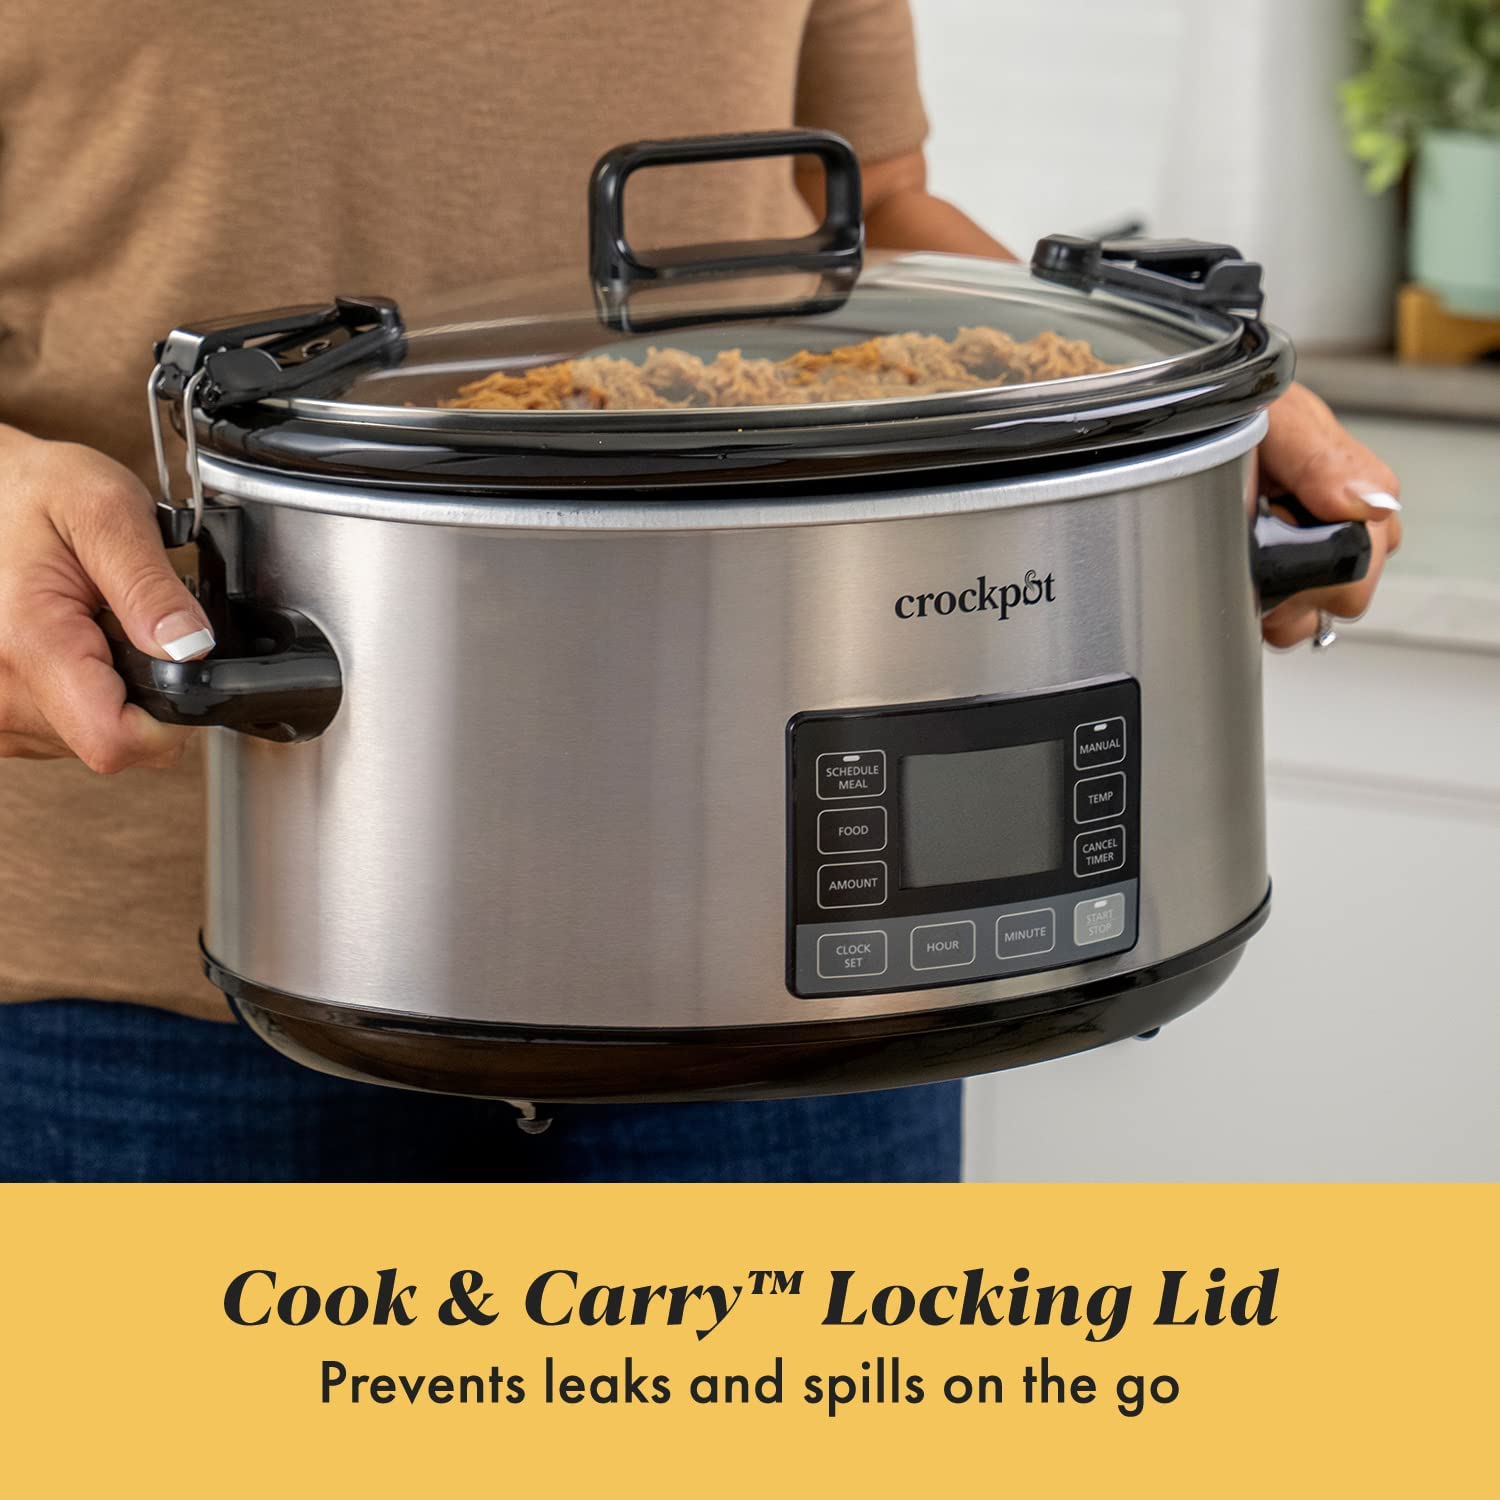 https://bigbigmart.com/wp-content/uploads/2023/03/Crockpot-Portable-7-Quart-Slow-Cooker-with-Locking-Lid-and-Auto-Adjust-Cook-Time-Technology-Stainless-Steel2.jpg